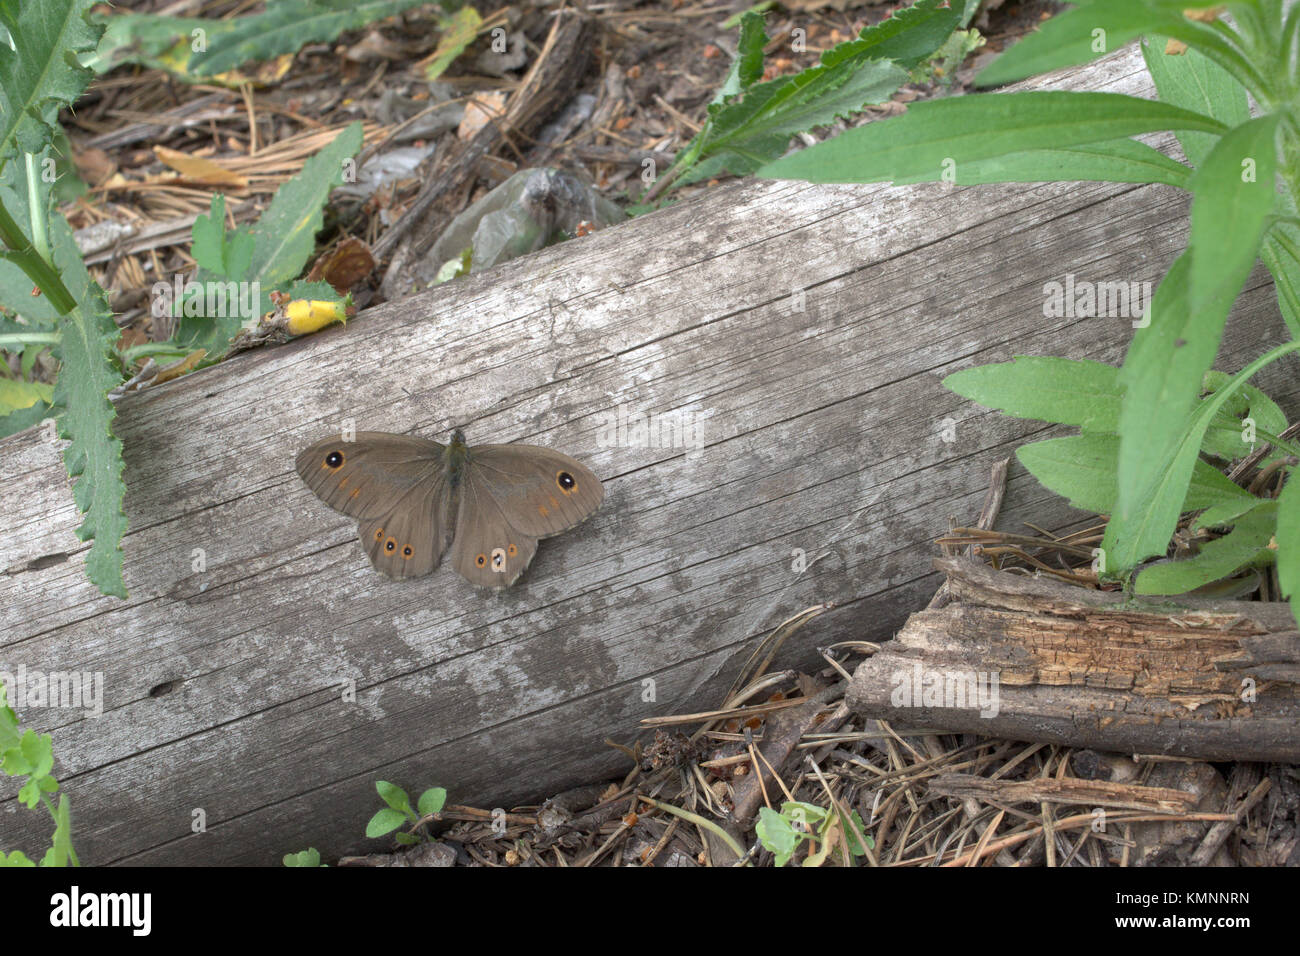 Lasiommata petropolitana butterfly with opened brown spotted velvety wings Stock Photo